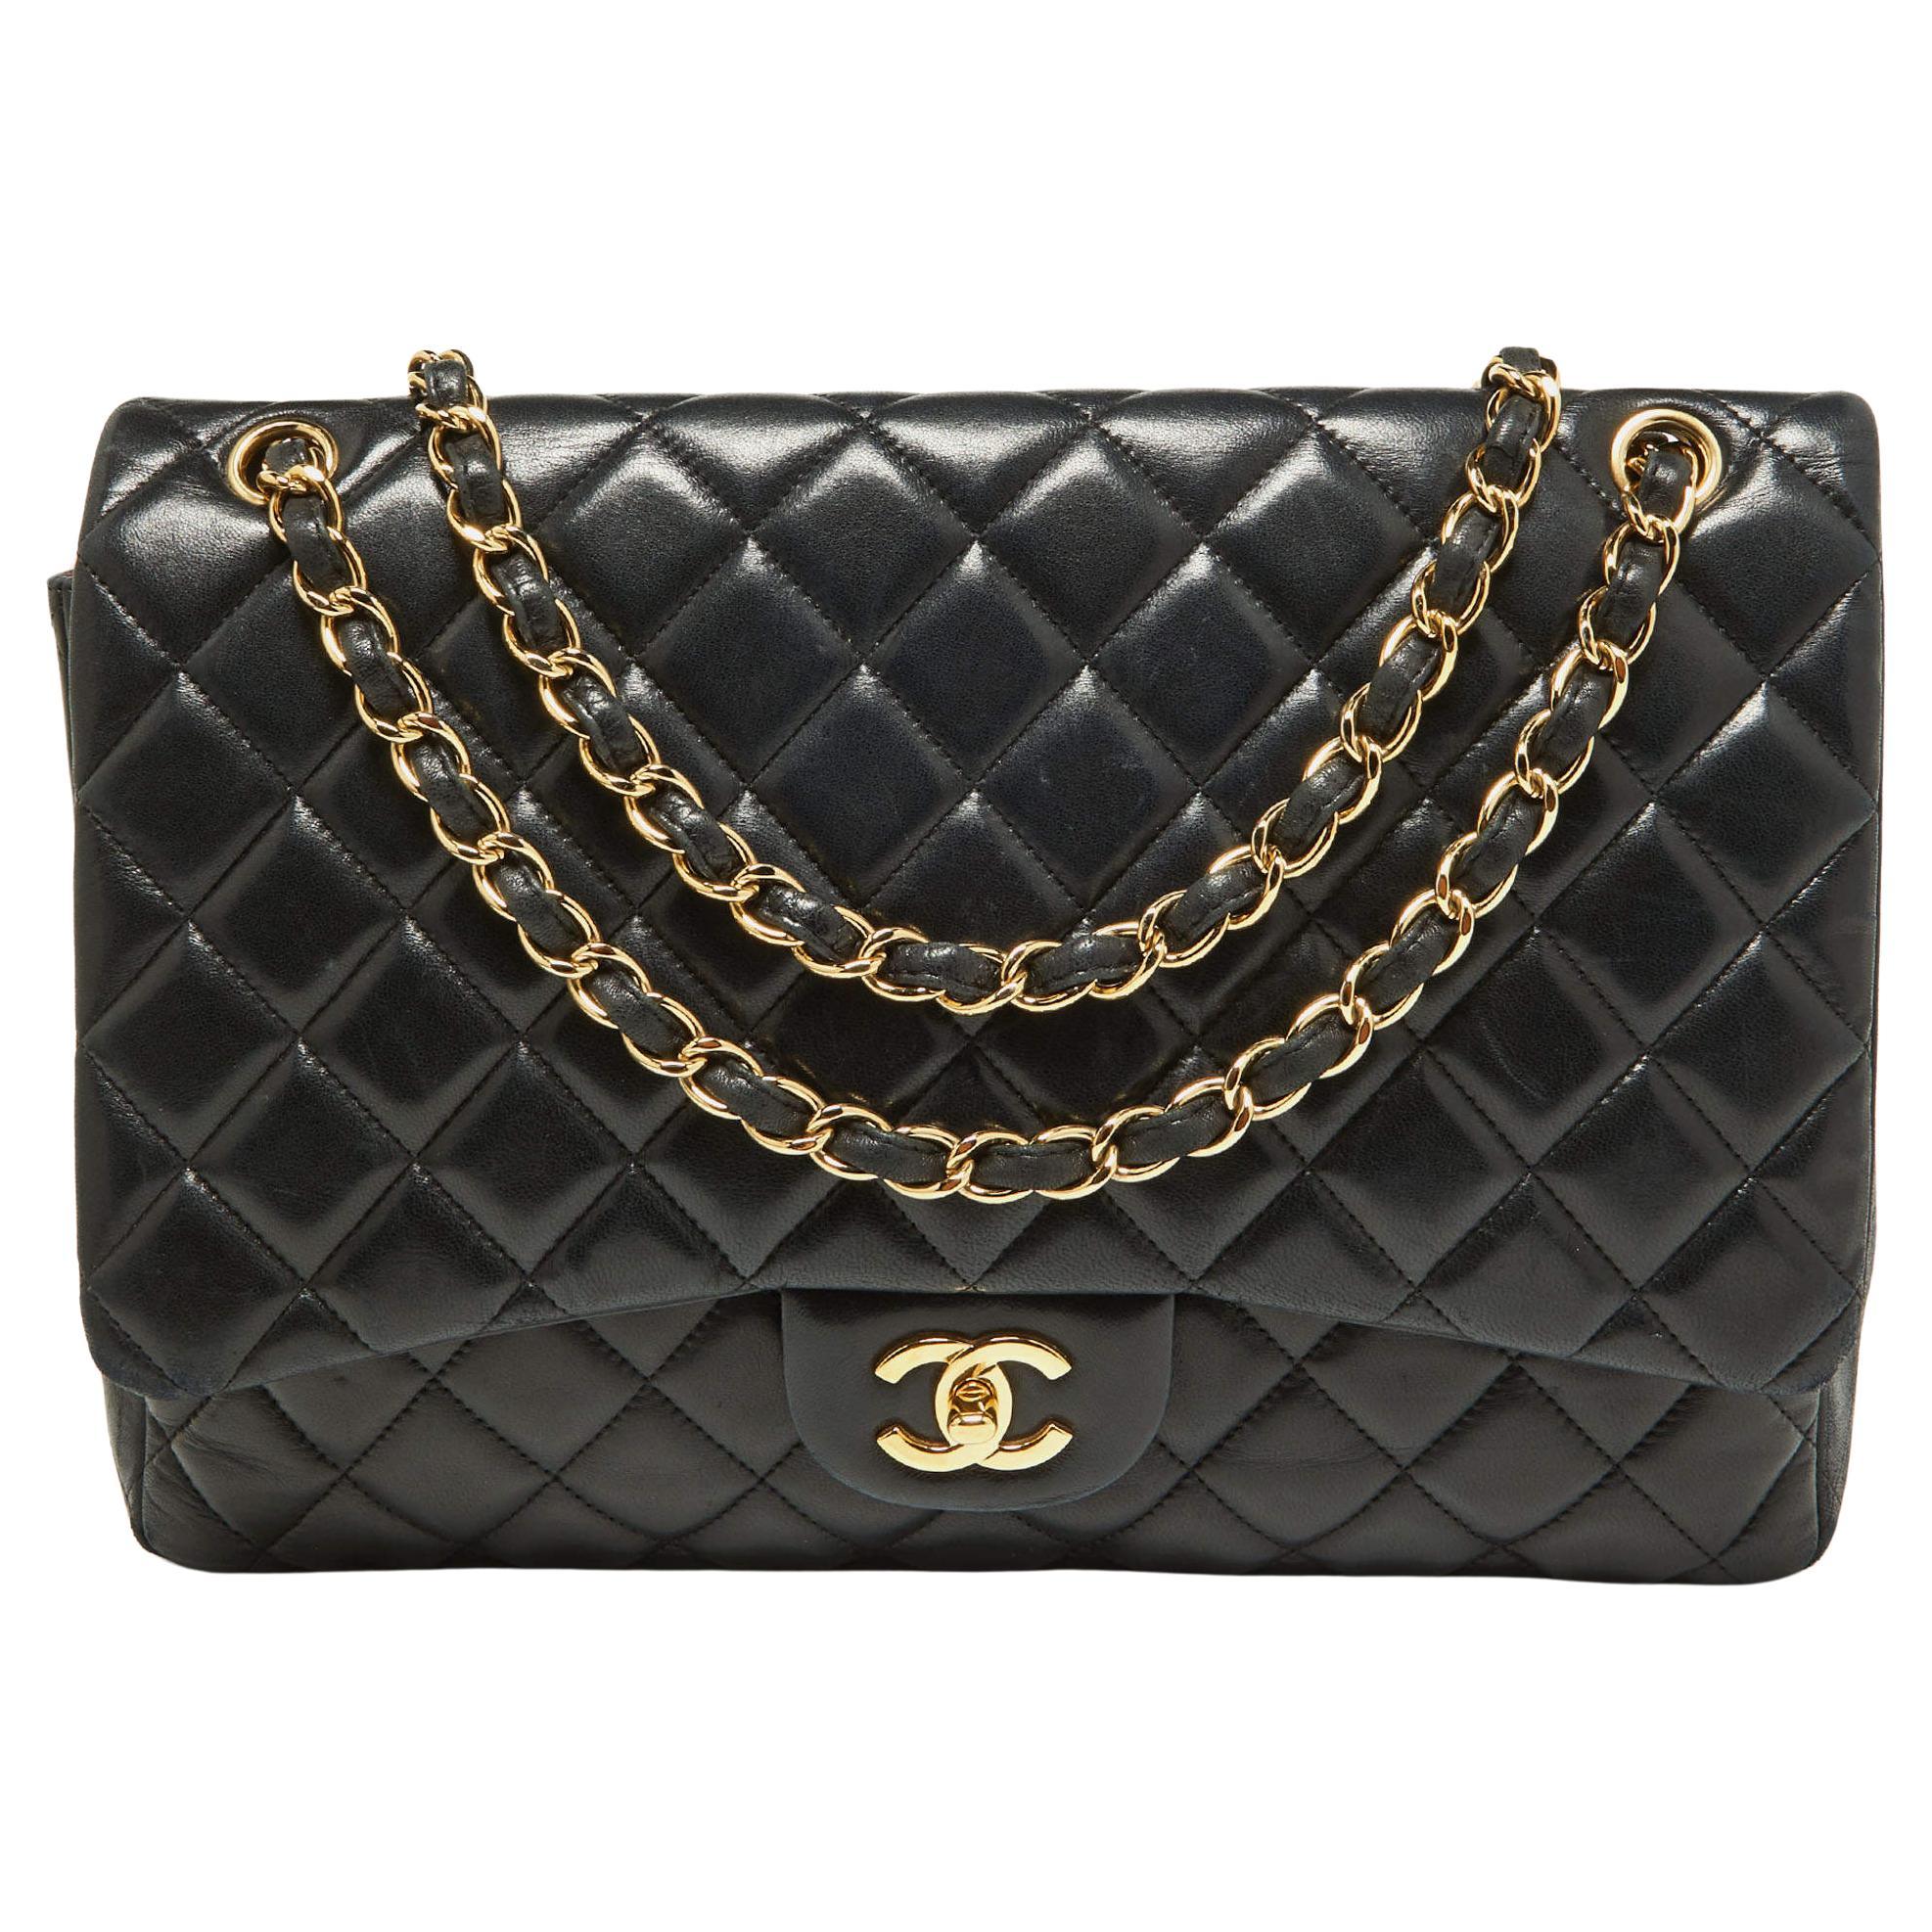 Chanel Timeless Jumbo single flap shoulder bag in black quilted